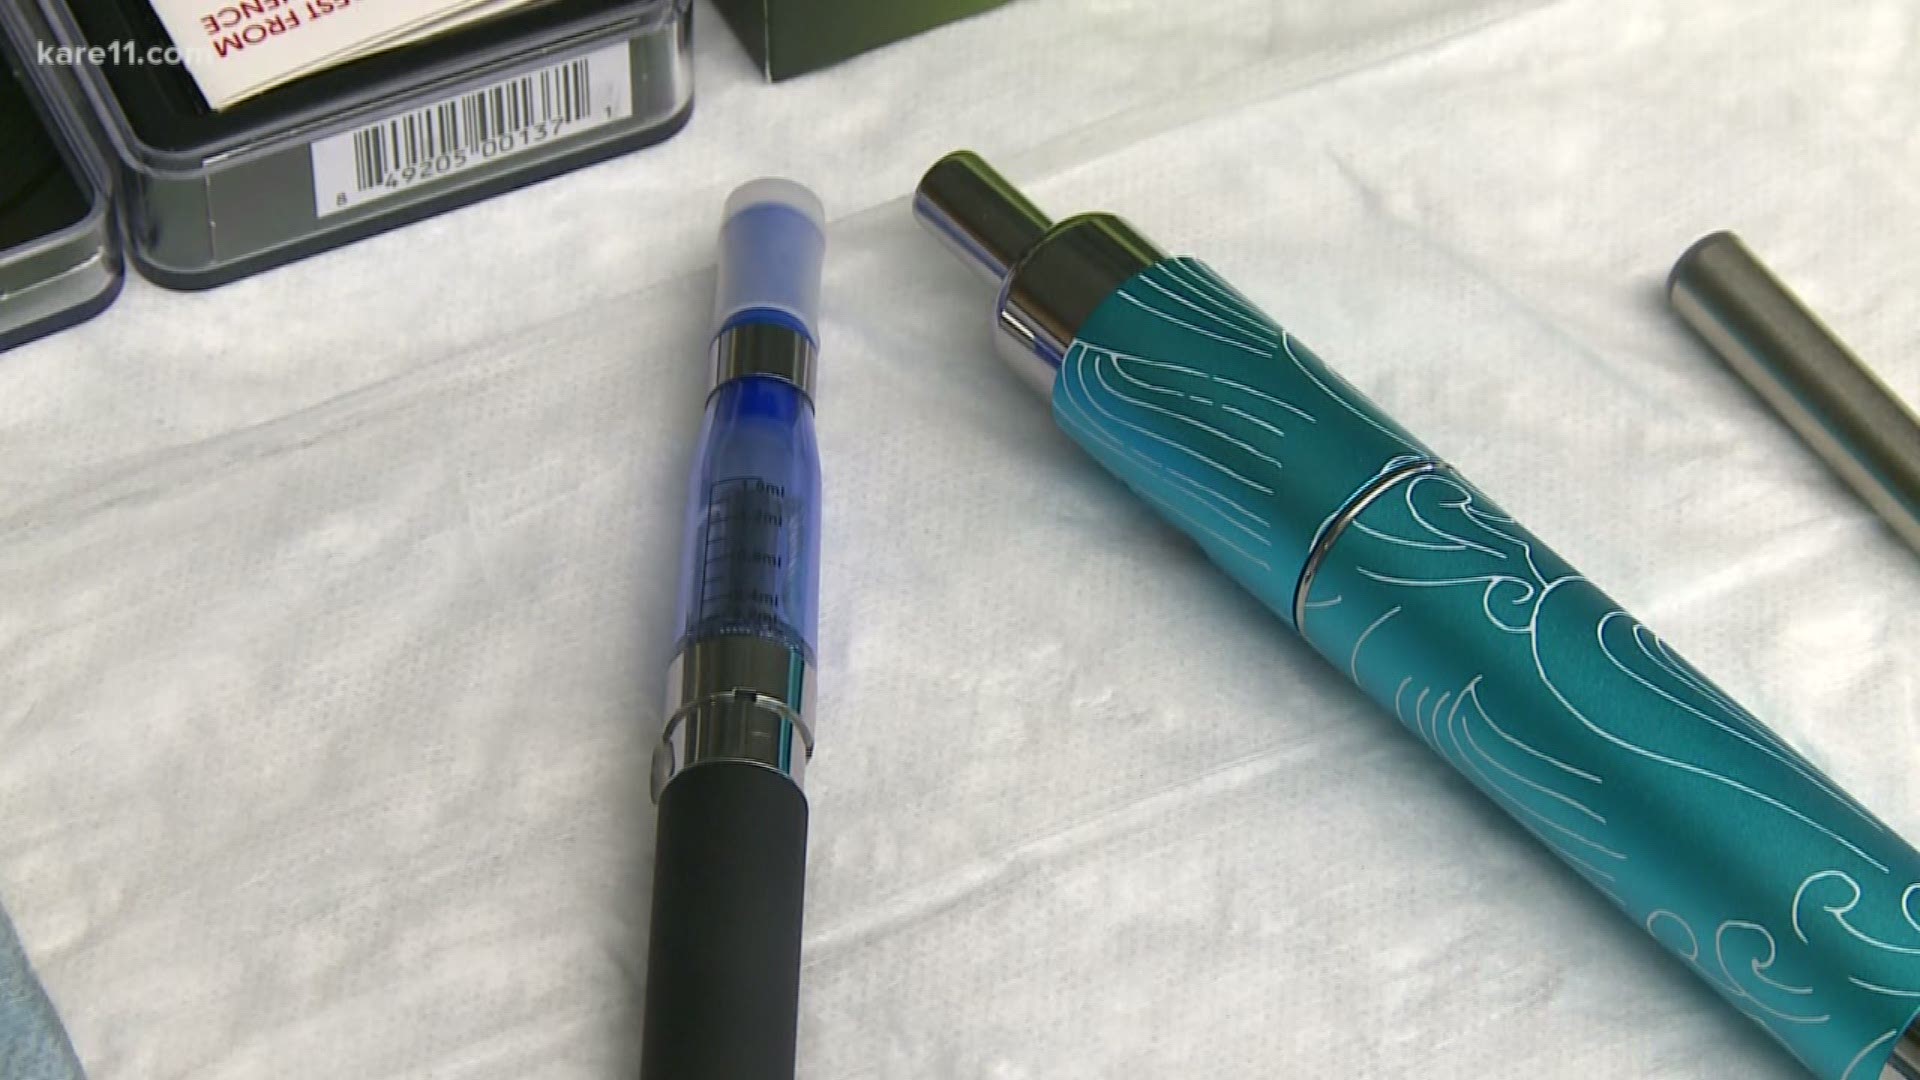 A new study at the U of M shows e-cigarettes aren't as harmless as you might think. https://kare11.tv/2LGv20G